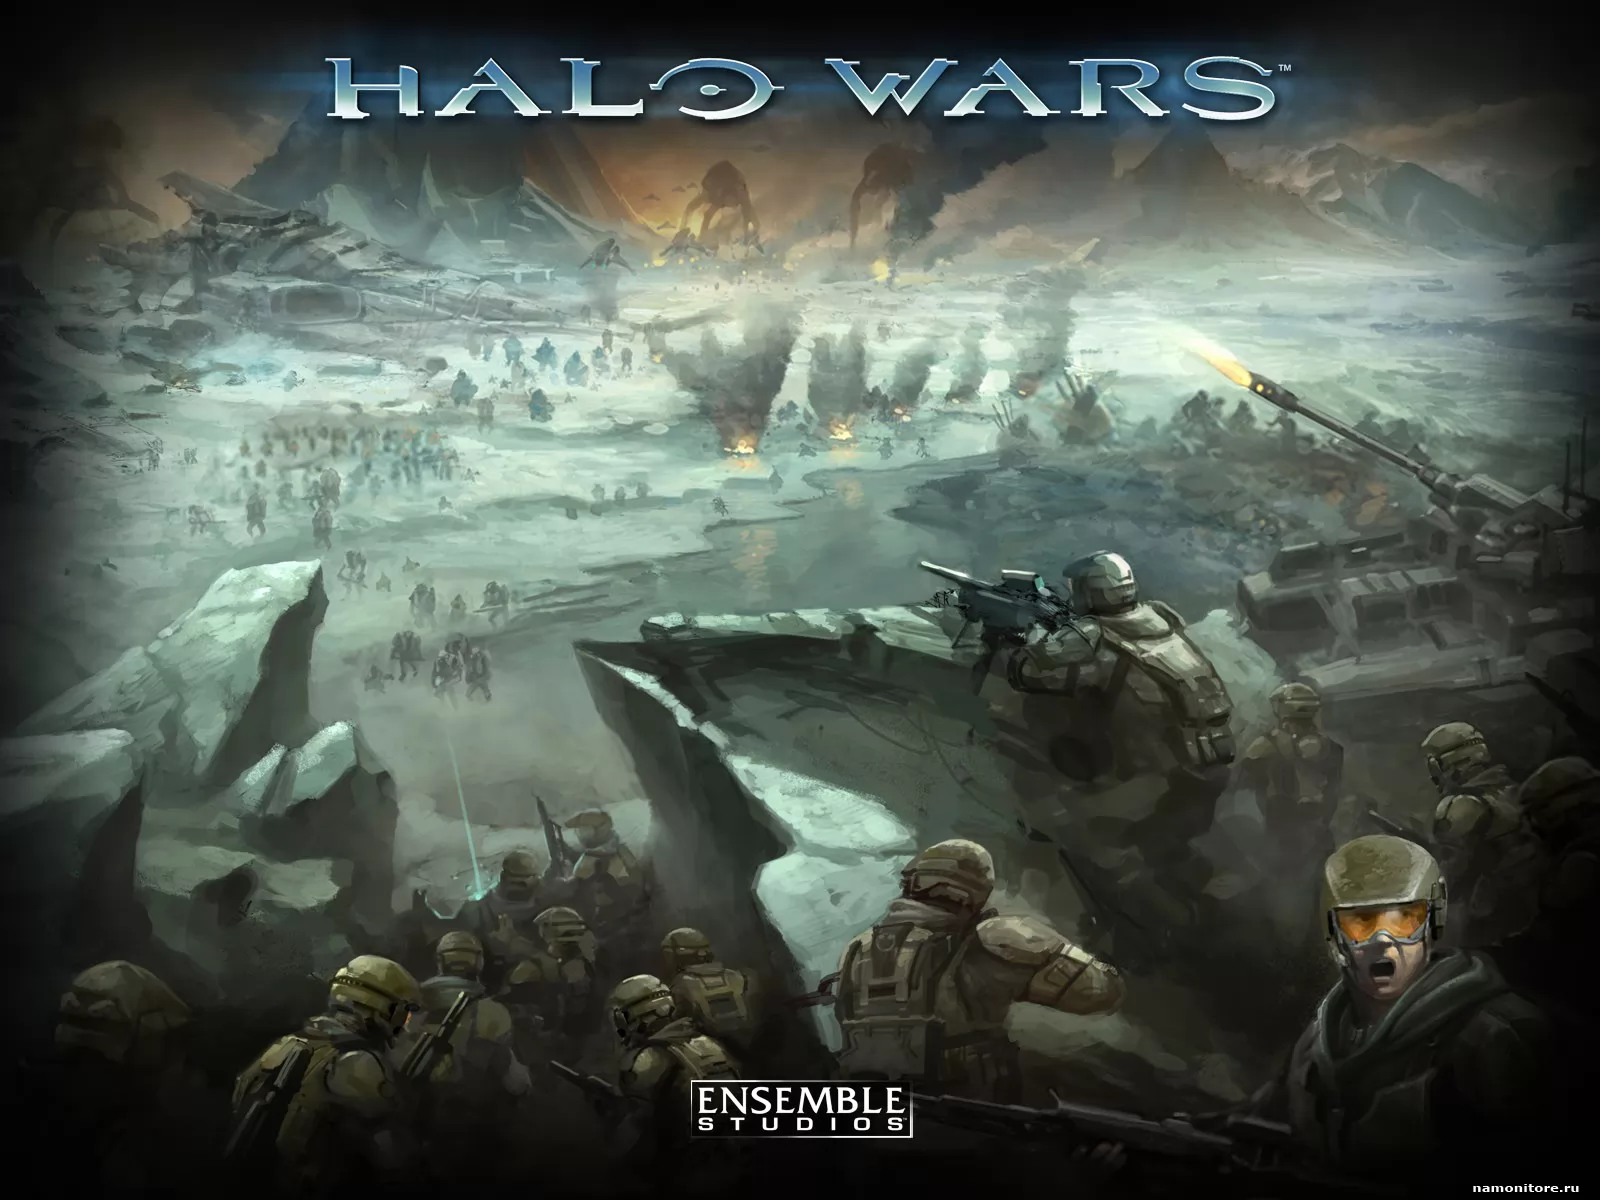 Halo Wars. Defence by height special troops in rocks, computer games, guns x